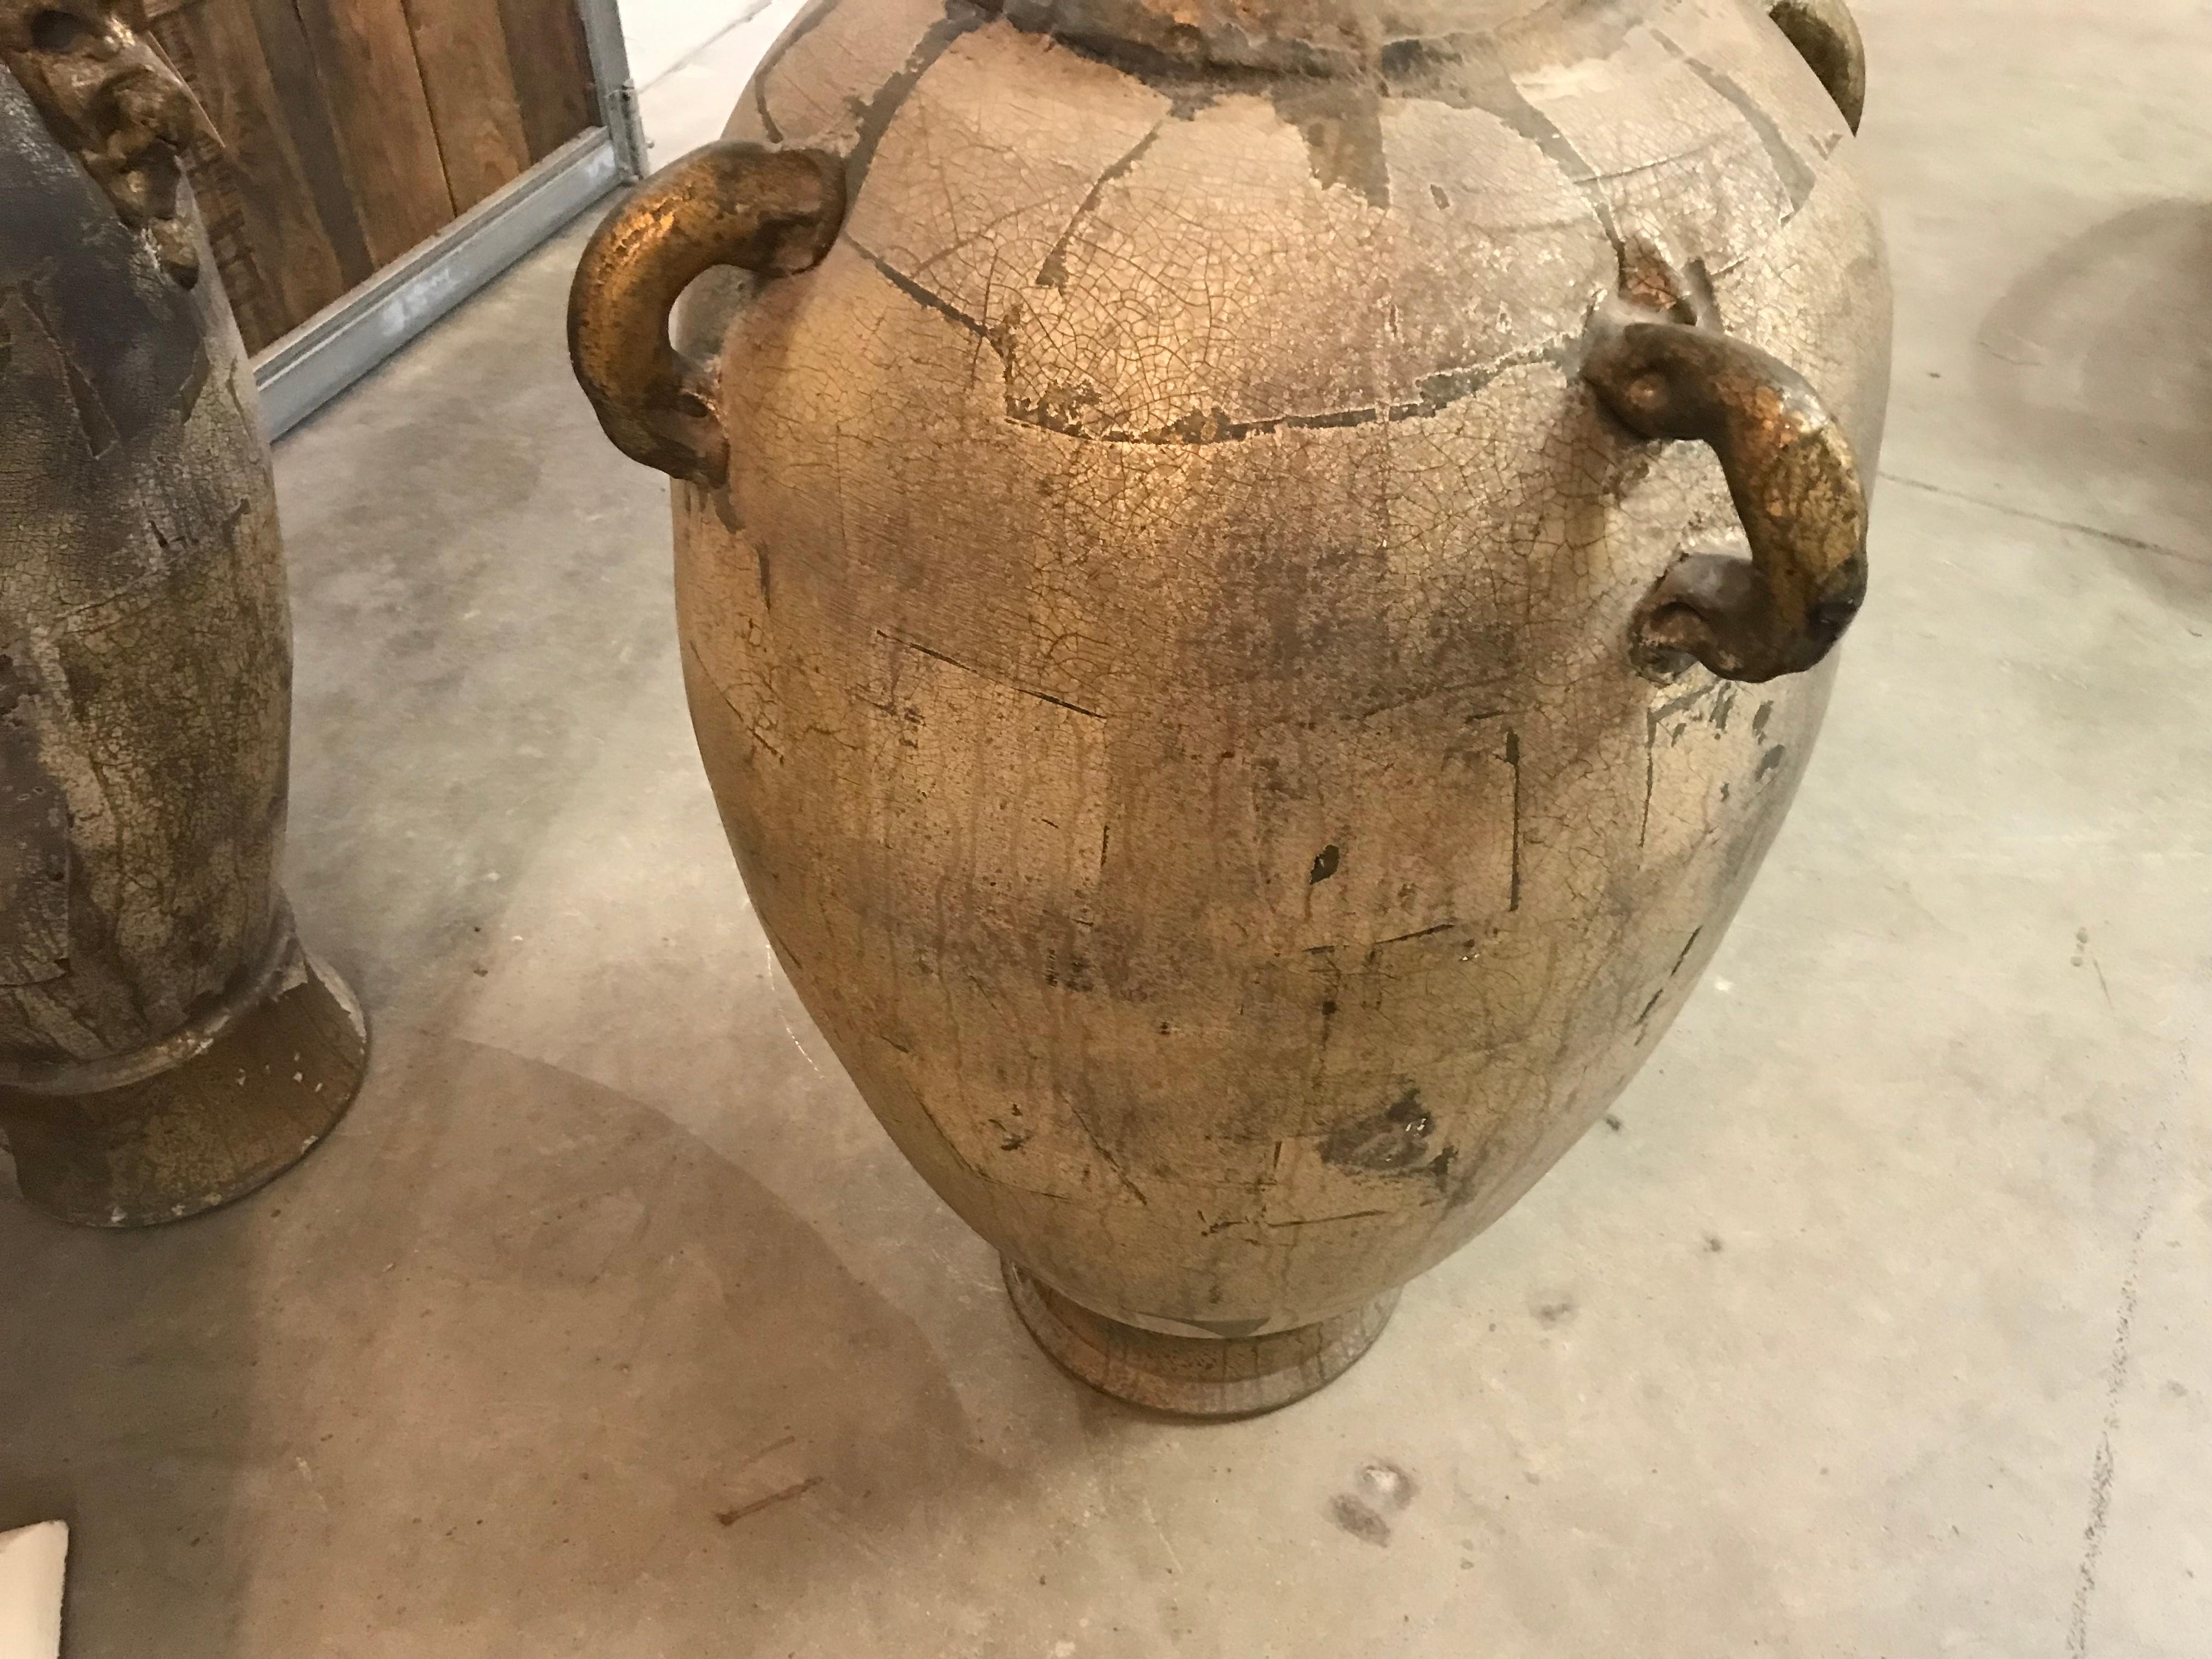 This amazing vase has nice patina. The faces are very cool.